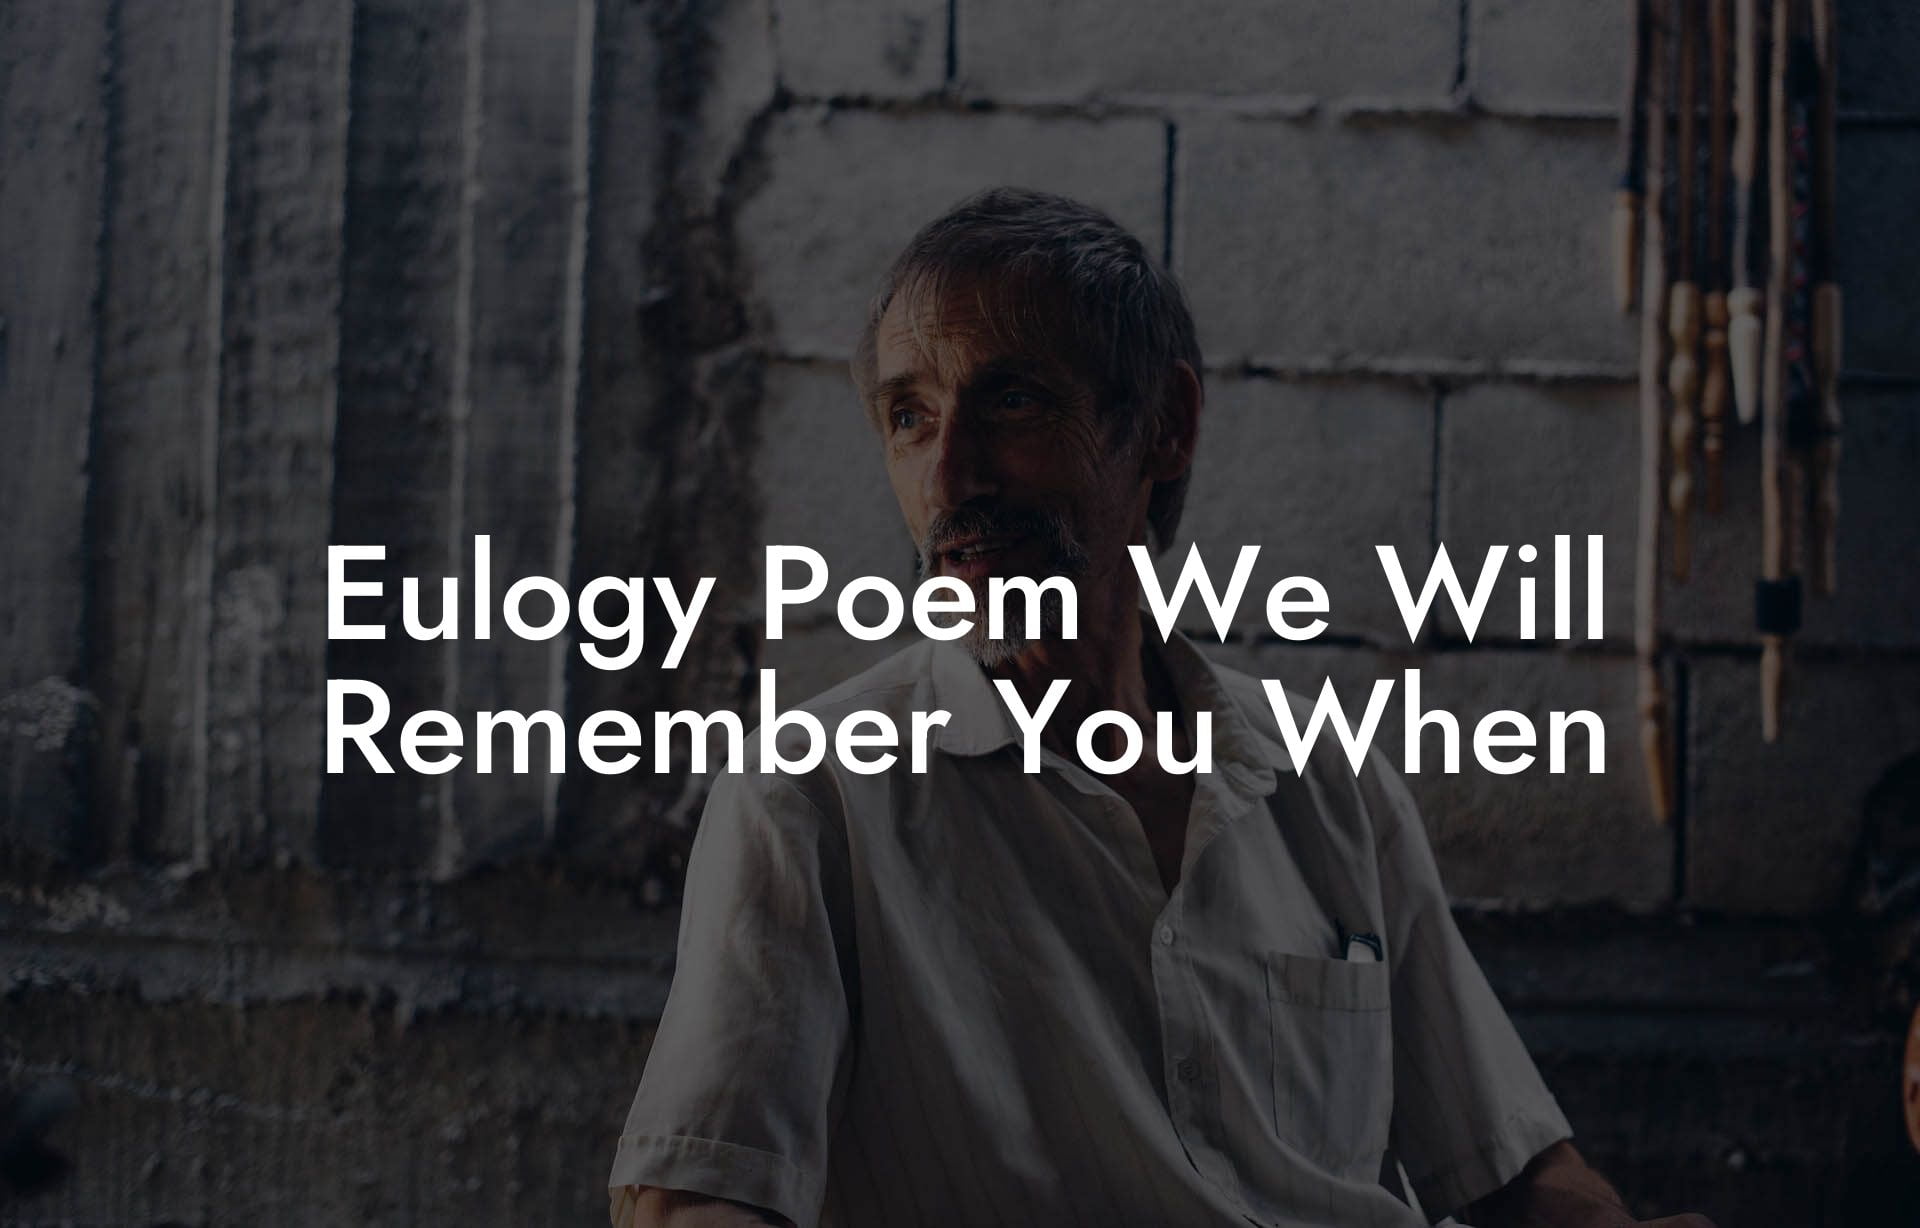 Eulogy Poem We Will Remember You When